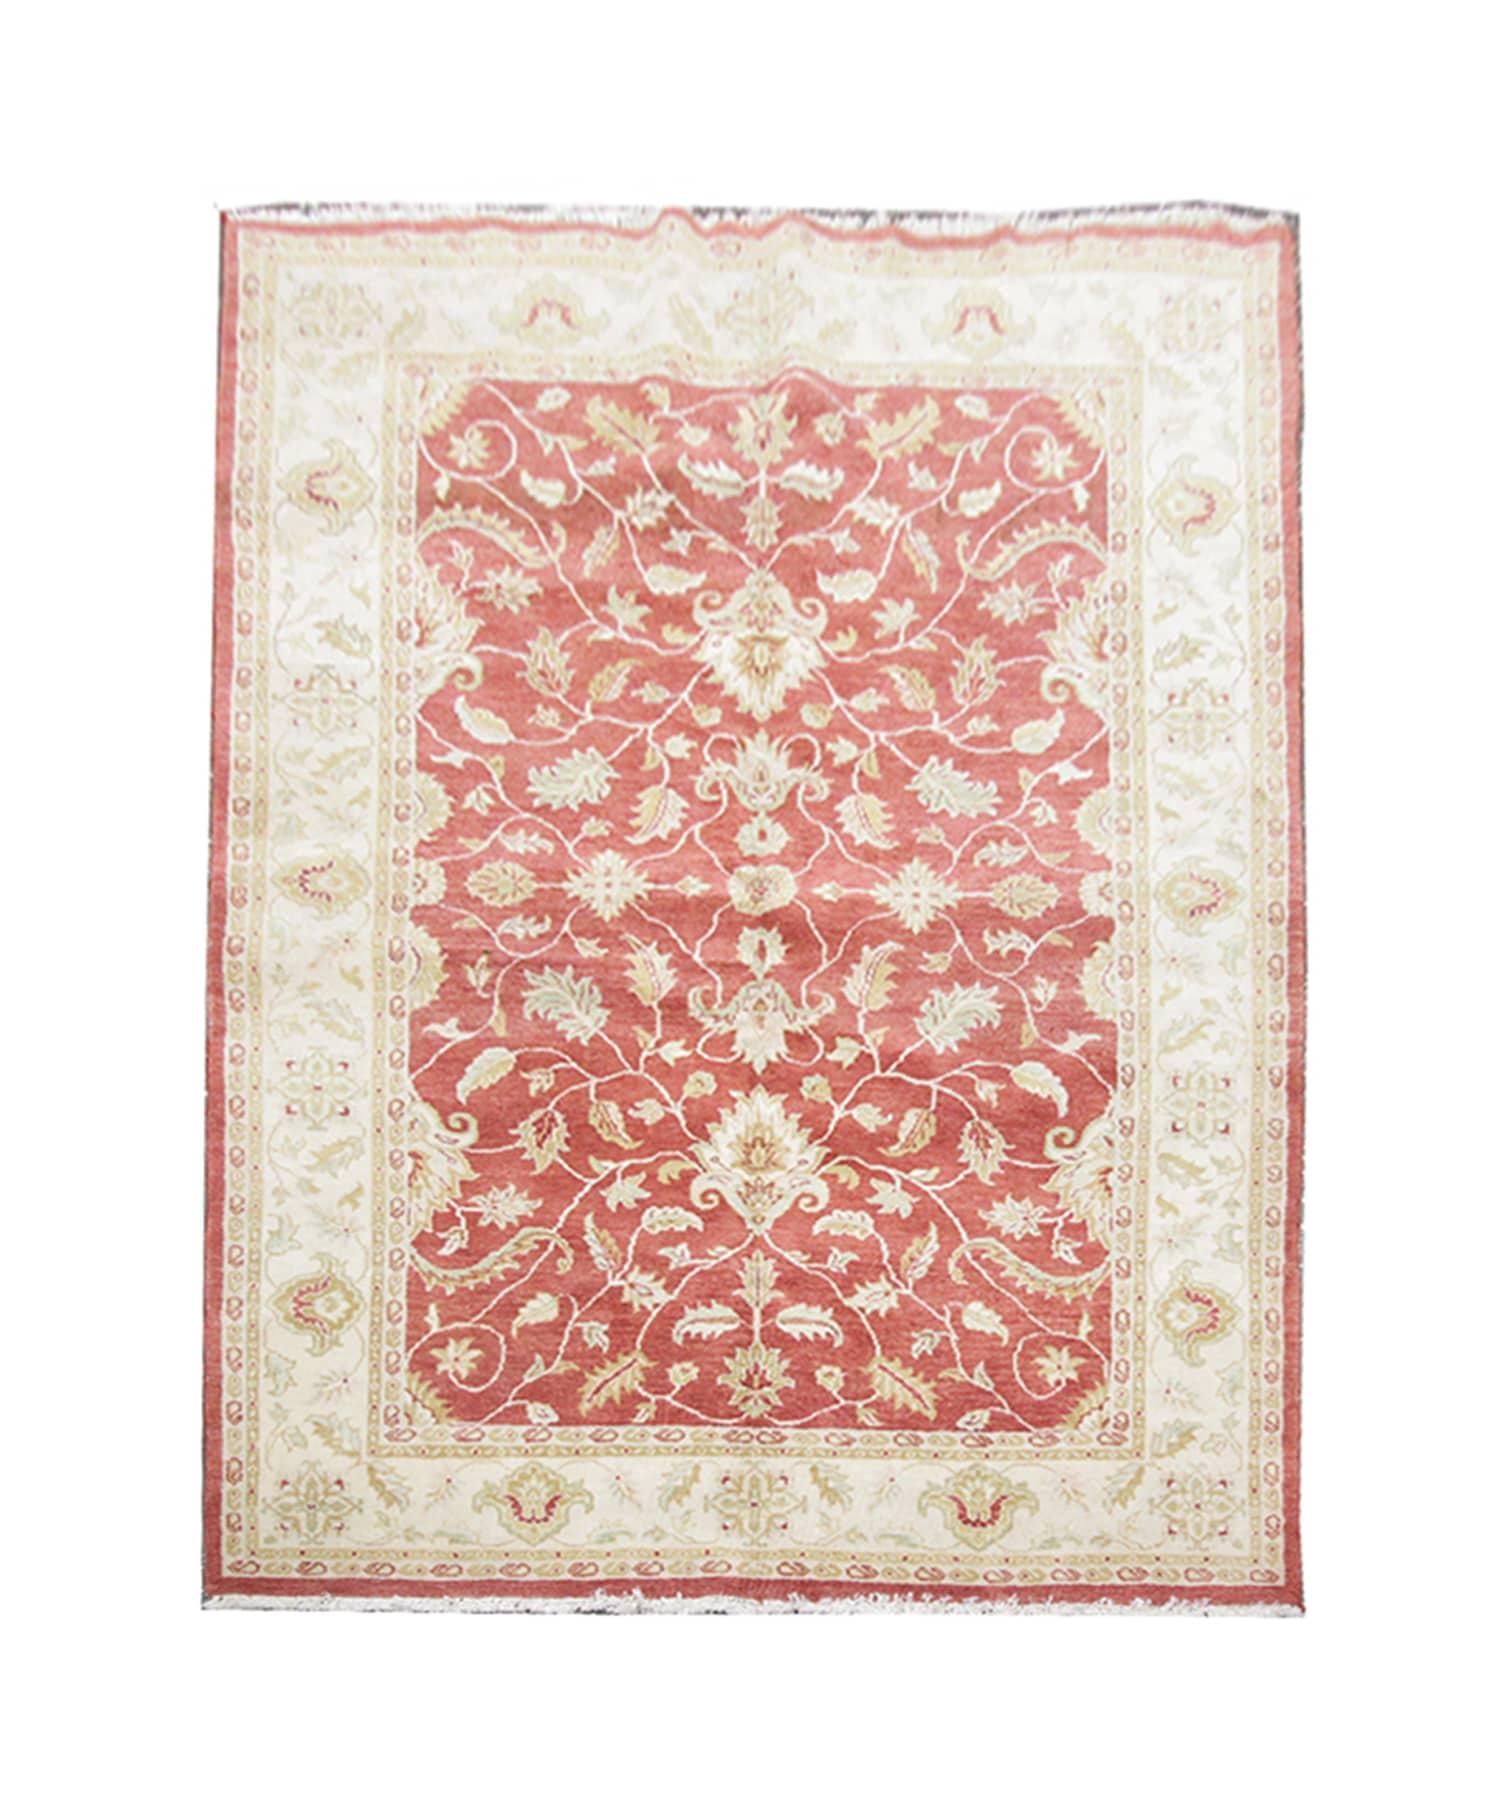 Hand-Knotted Oriental Rugs, Red Living Room Rugs, Handmade Carpet Floral Ziegler Rugs For Sale